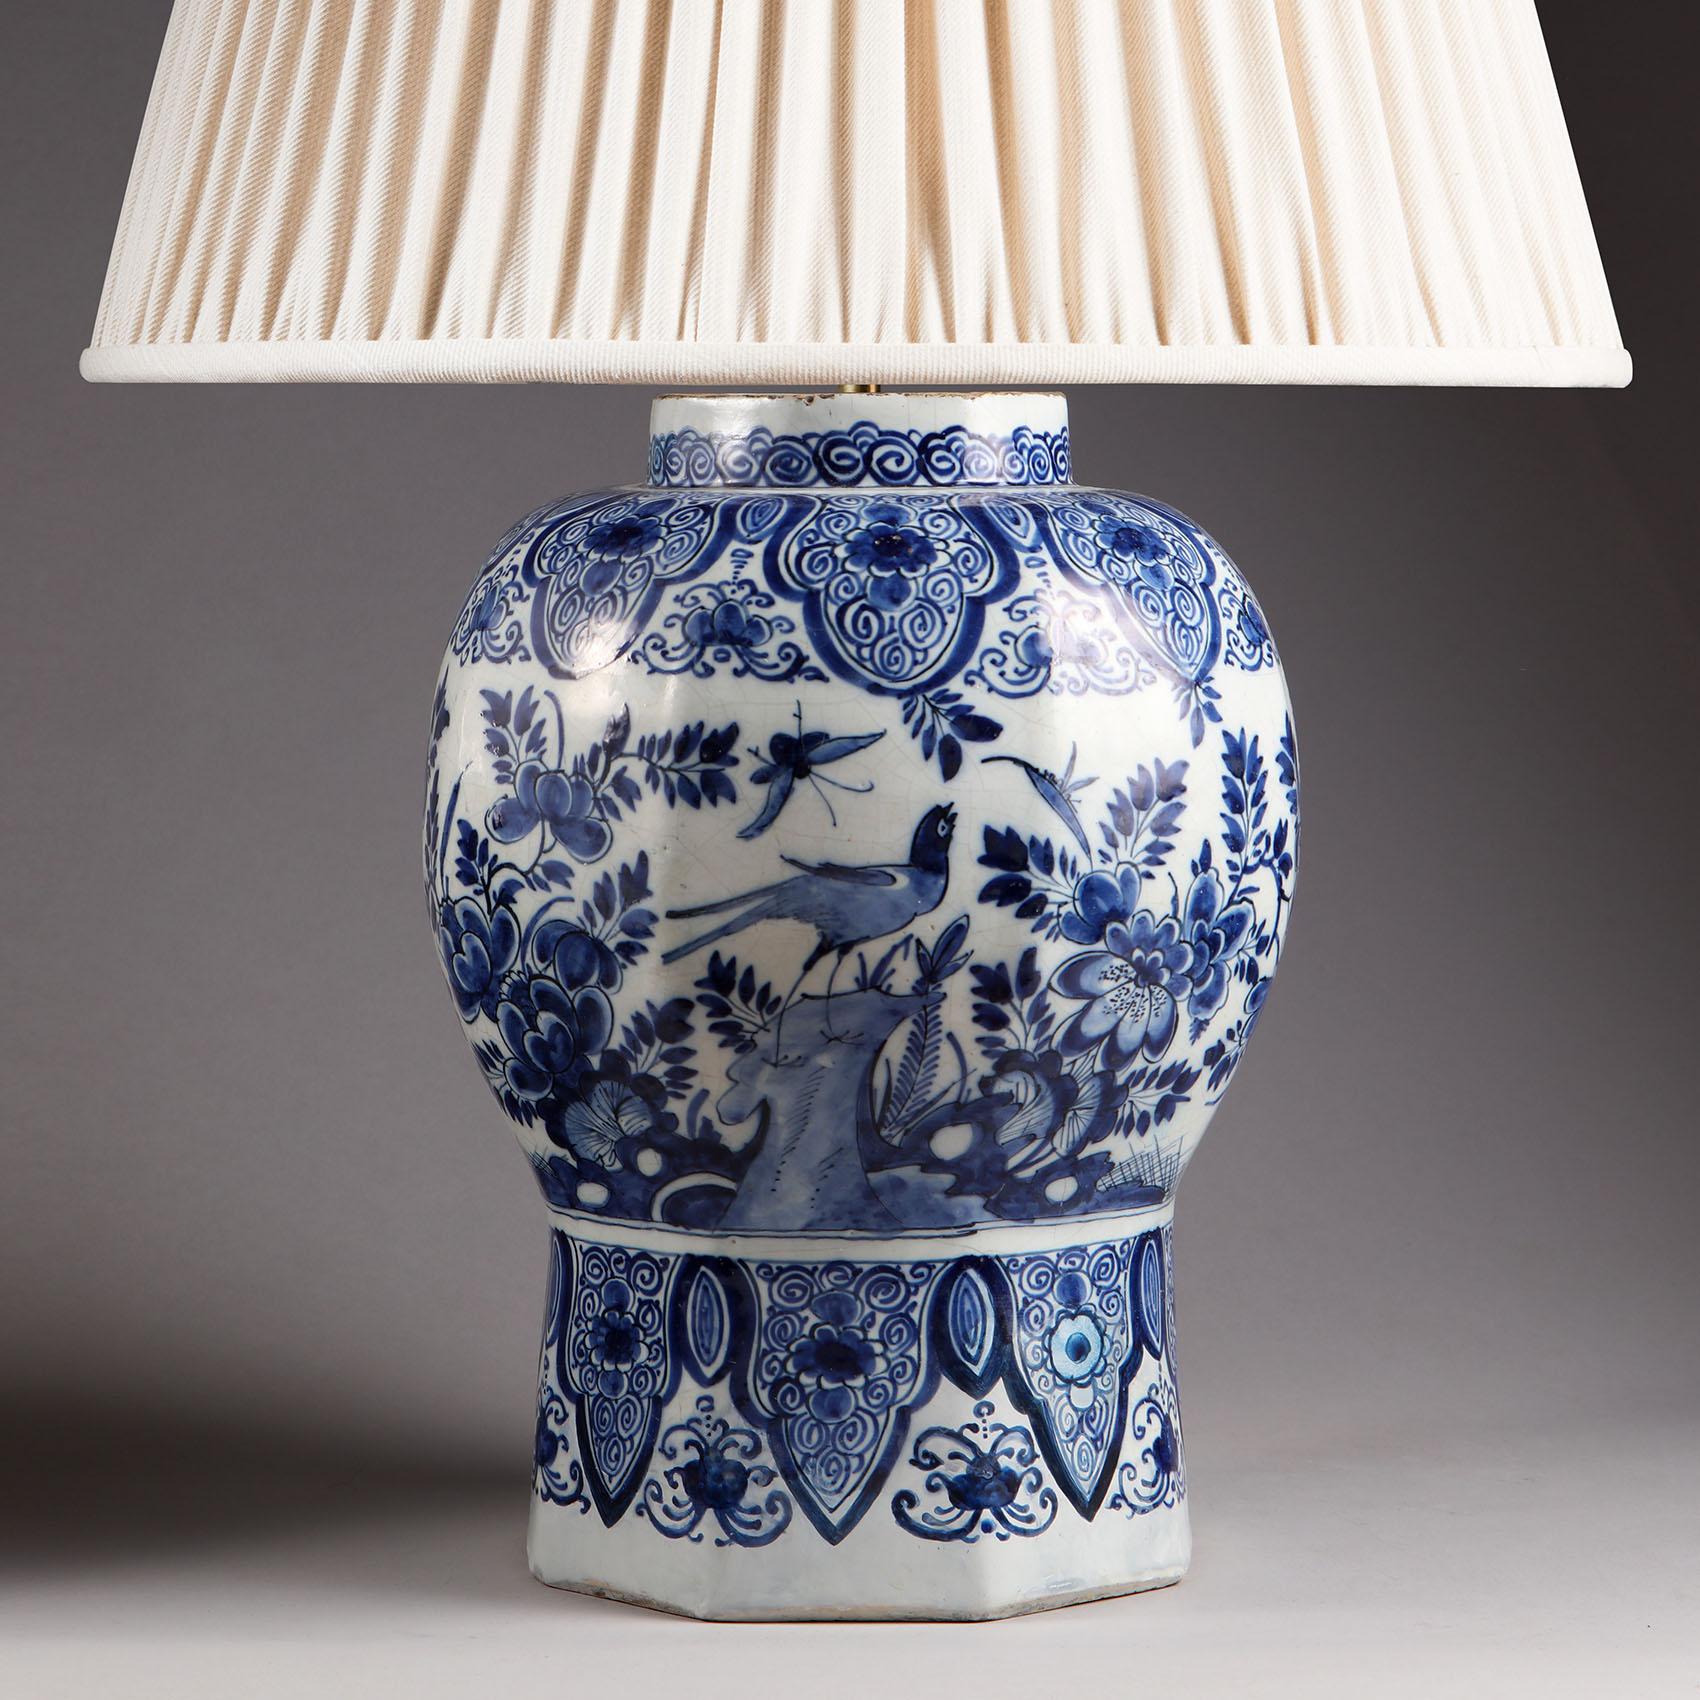 18th Century Delft Blue and White Vase Mounted as a Table Lamp In Good Condition In London, by appointment only